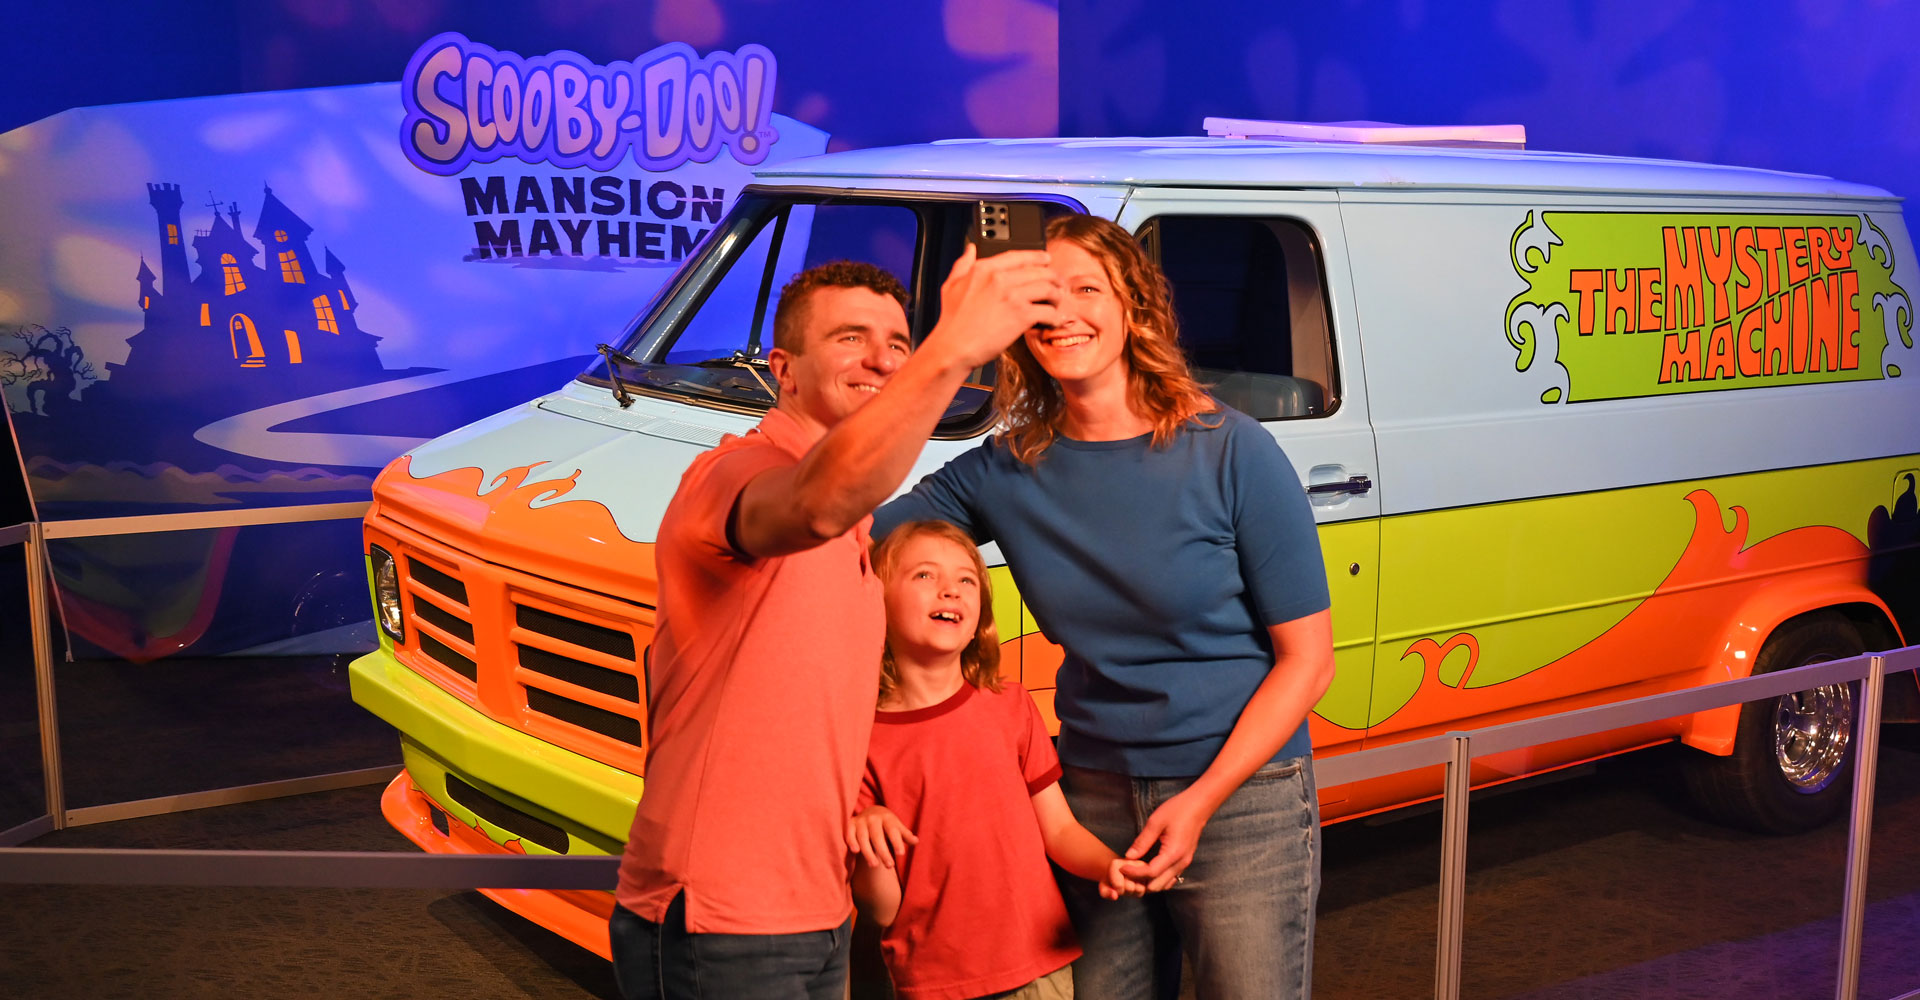 Family posing for a selfie in front of The Mystery Machine.